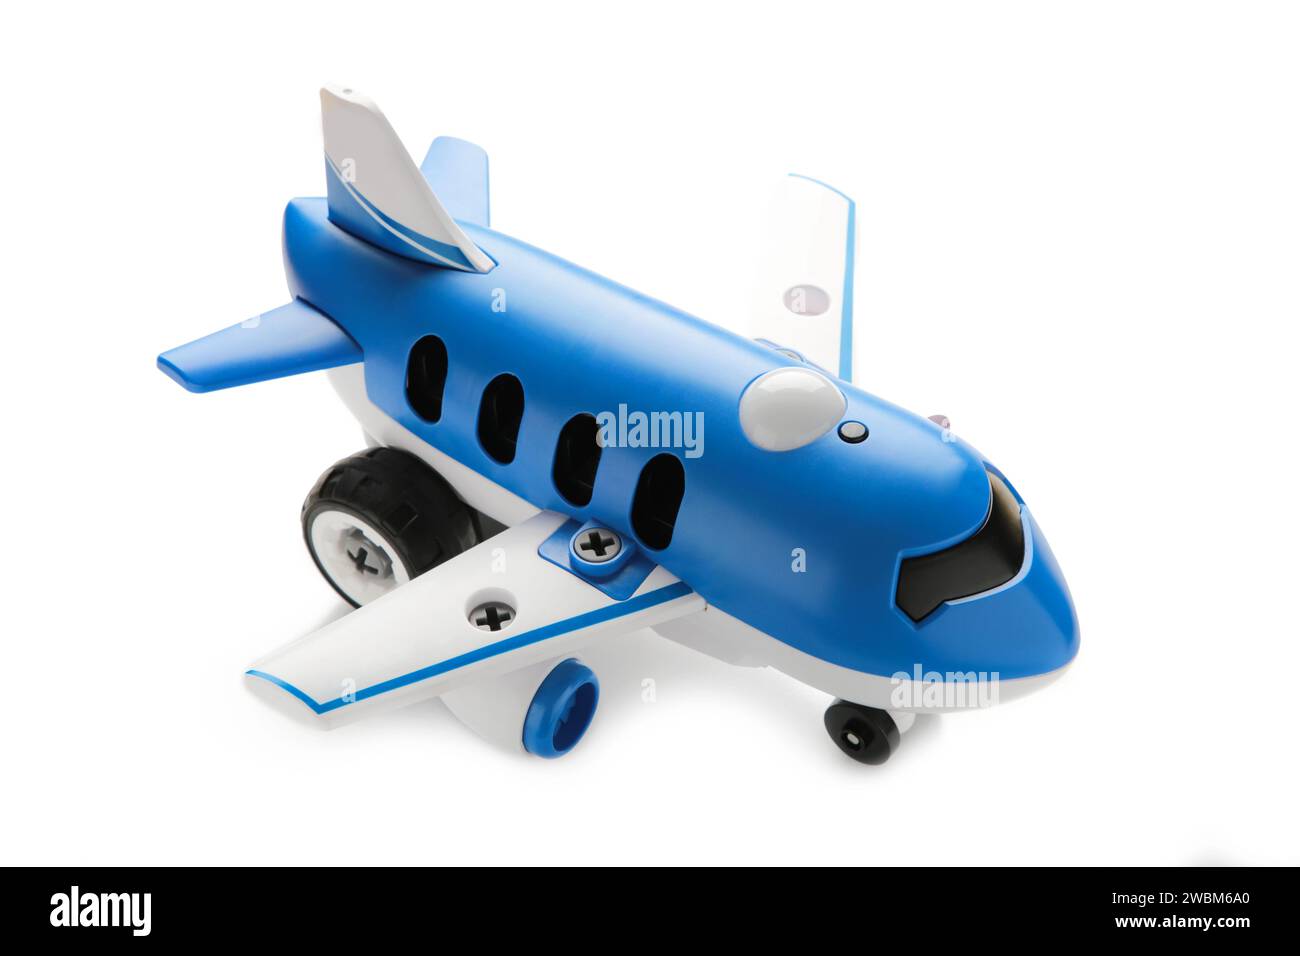 Plastic toy plane isolated on white background. Top view Stock Photo